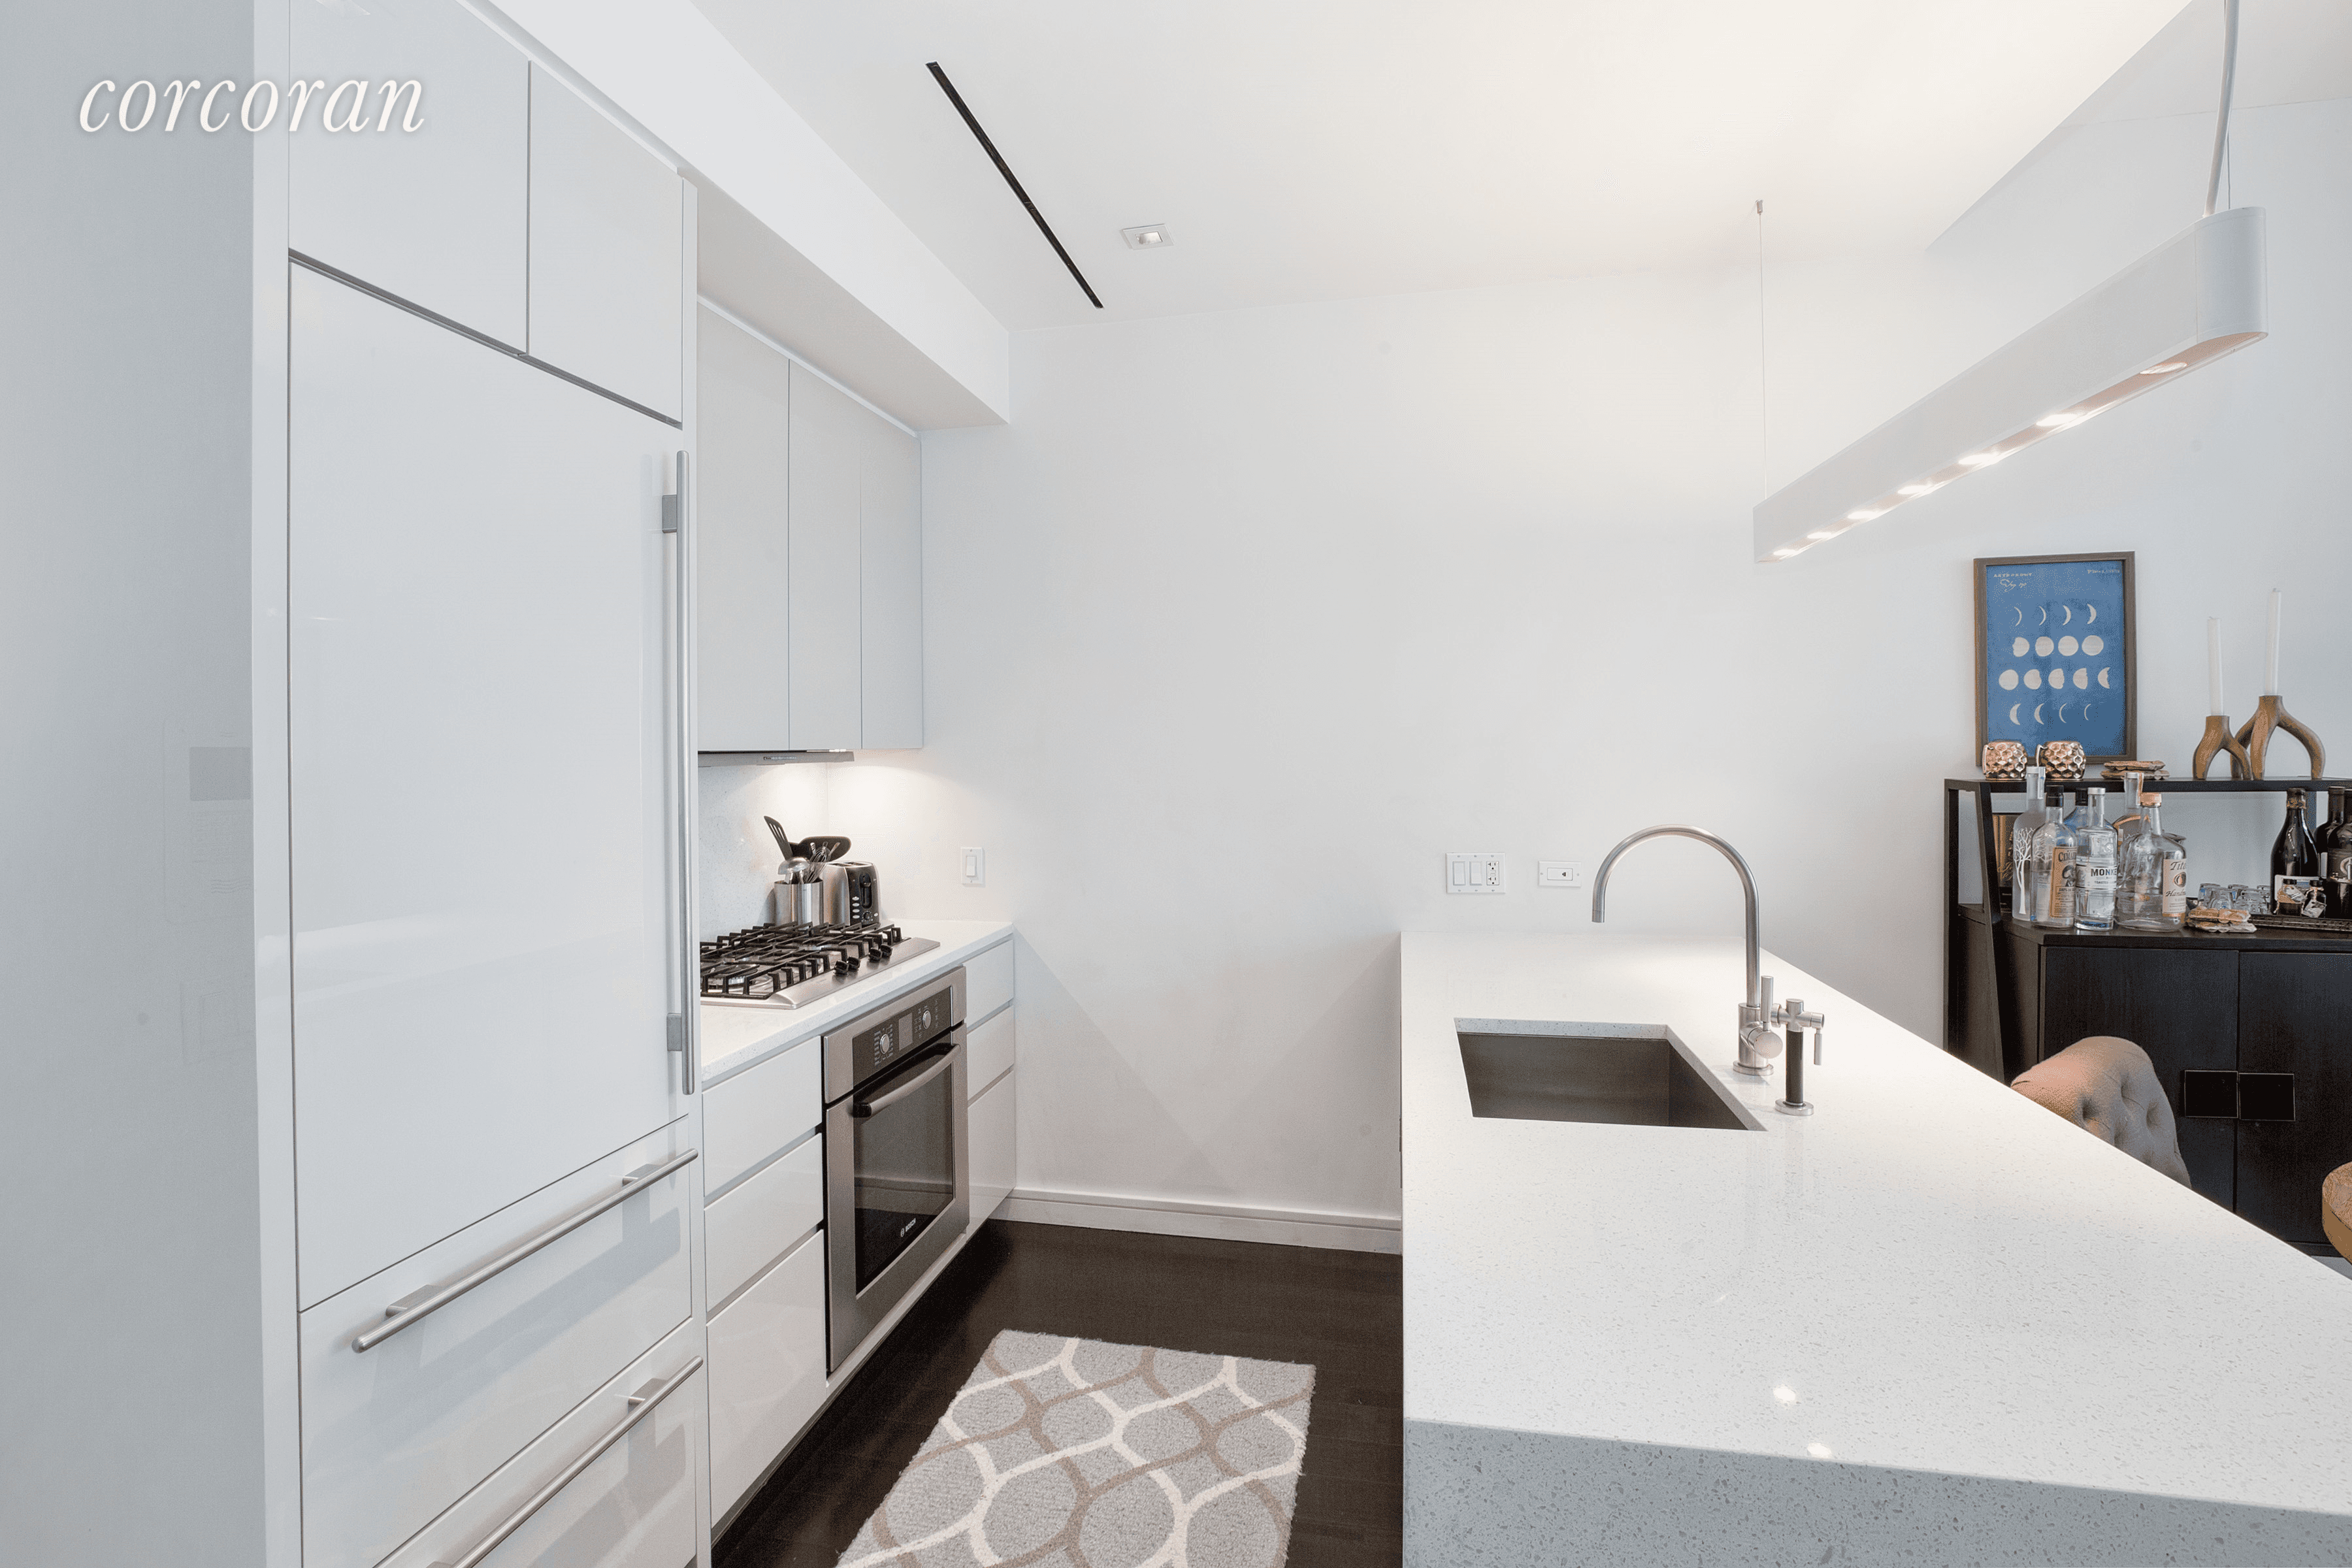 Reduced to sell ! Apartment 6B is a meticulously maintained 1 bedroom, 1 bathroom with a sophisticated vibe nestled in the Tempo condominium, a state of the art building in ...